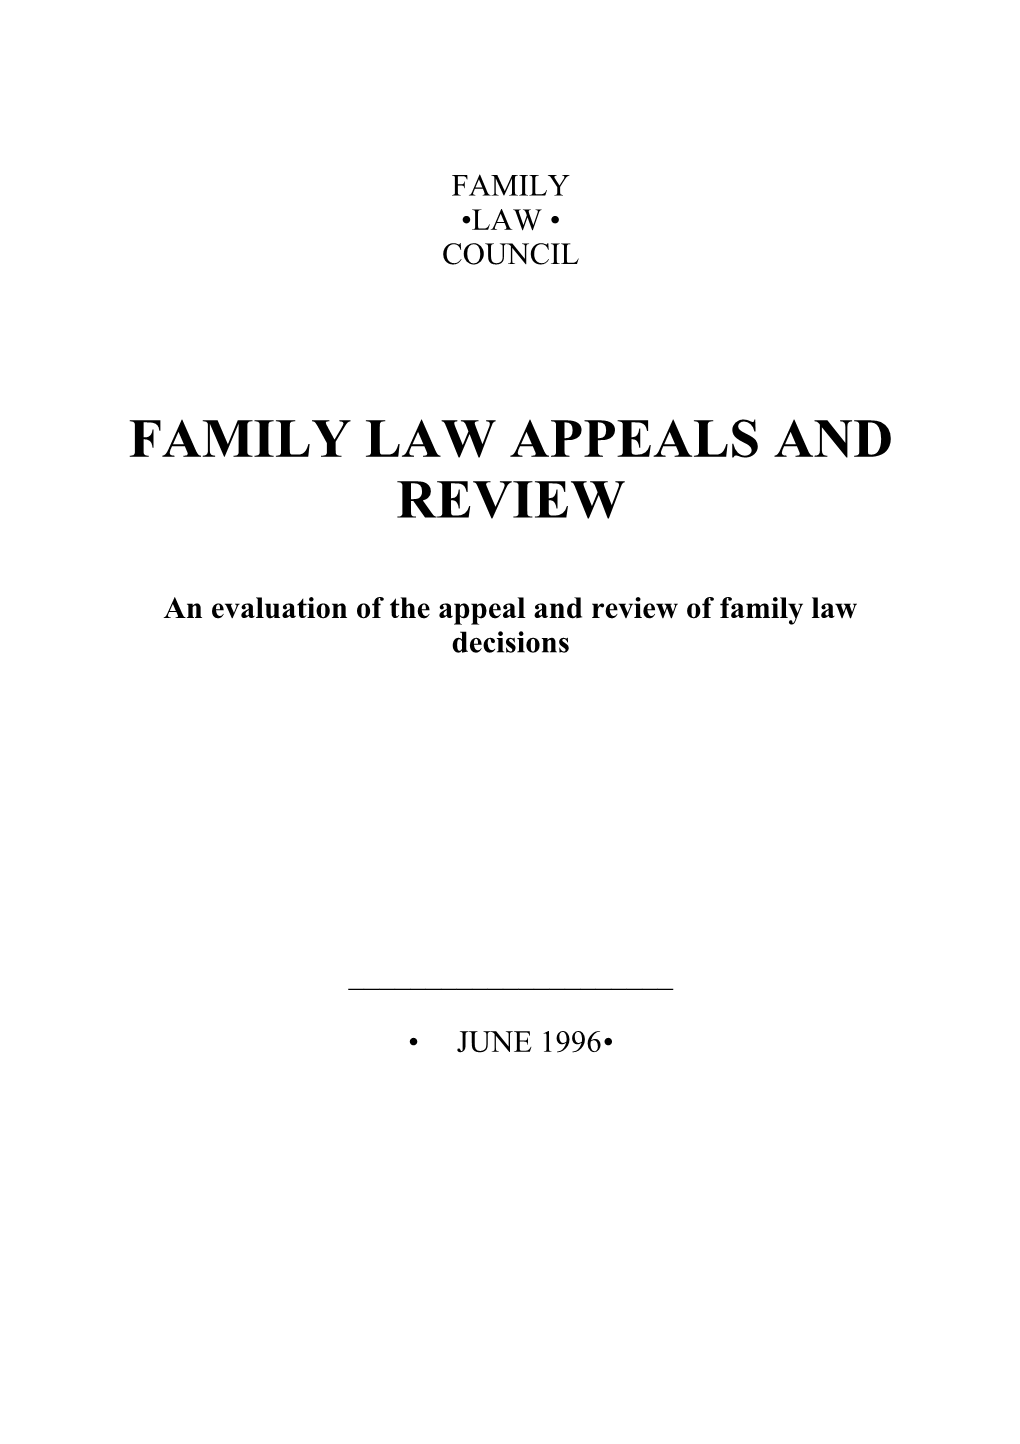 Family Law Appeals and Review